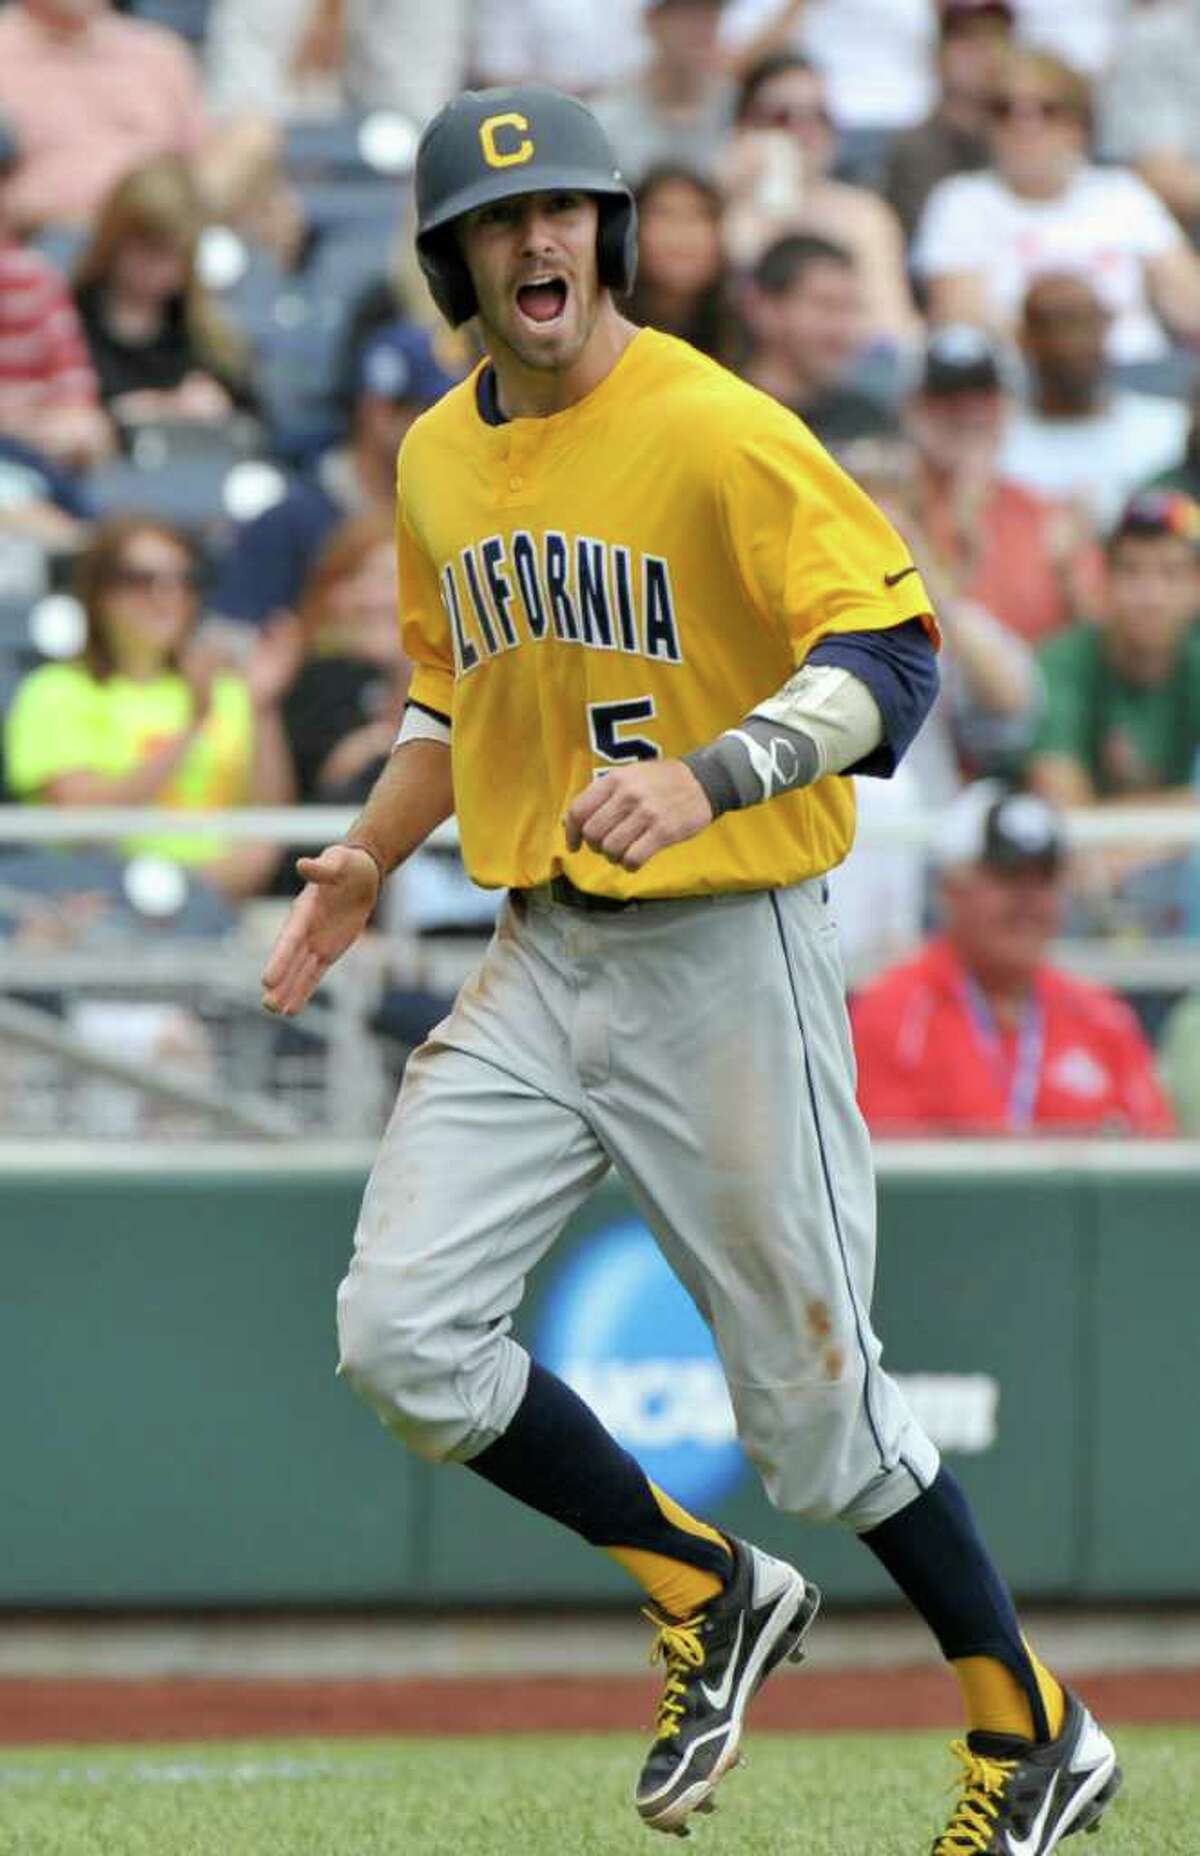 California's Derek Campbell (5) reacts after scoring against Texas A&M on a sacrifice fly by Tony Renda during the fifth inning of an NCAA College World Series elimination baseball game in Omaha, Neb., Tuesday, June 21, 2011. Campbell hit a two-run single earlier in the inning.